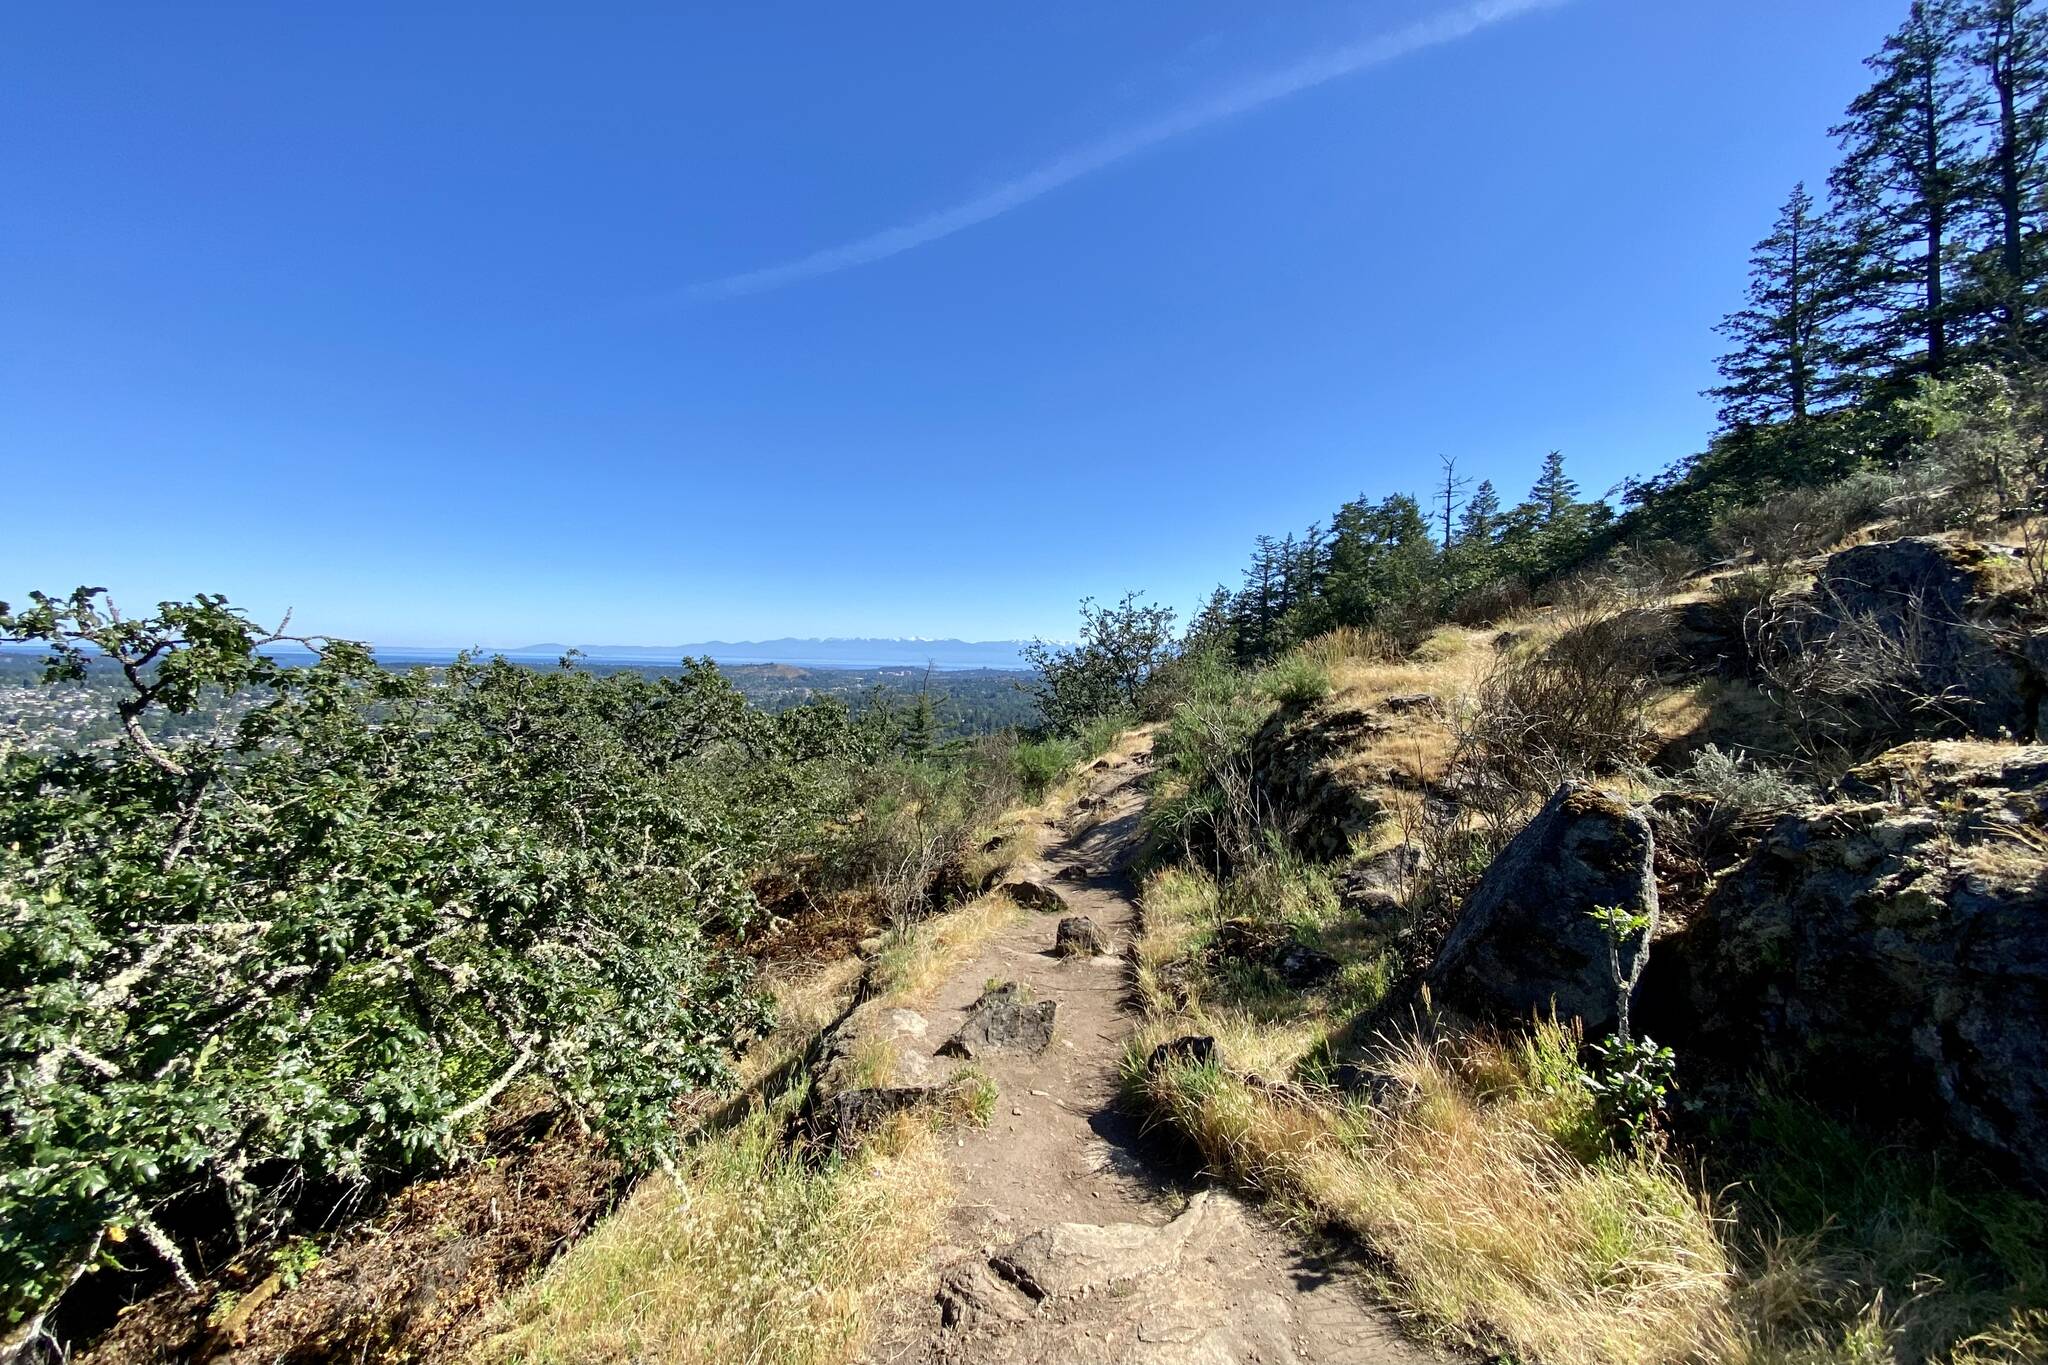 Featuring steep and rocky climbs and narrow trails, a trip to the Mt. Douglas summit and back down to the beach parking lot takes about an hour and a half, depending on pace and rest breaks. Justin Samanski-Langille/Victoria News photo